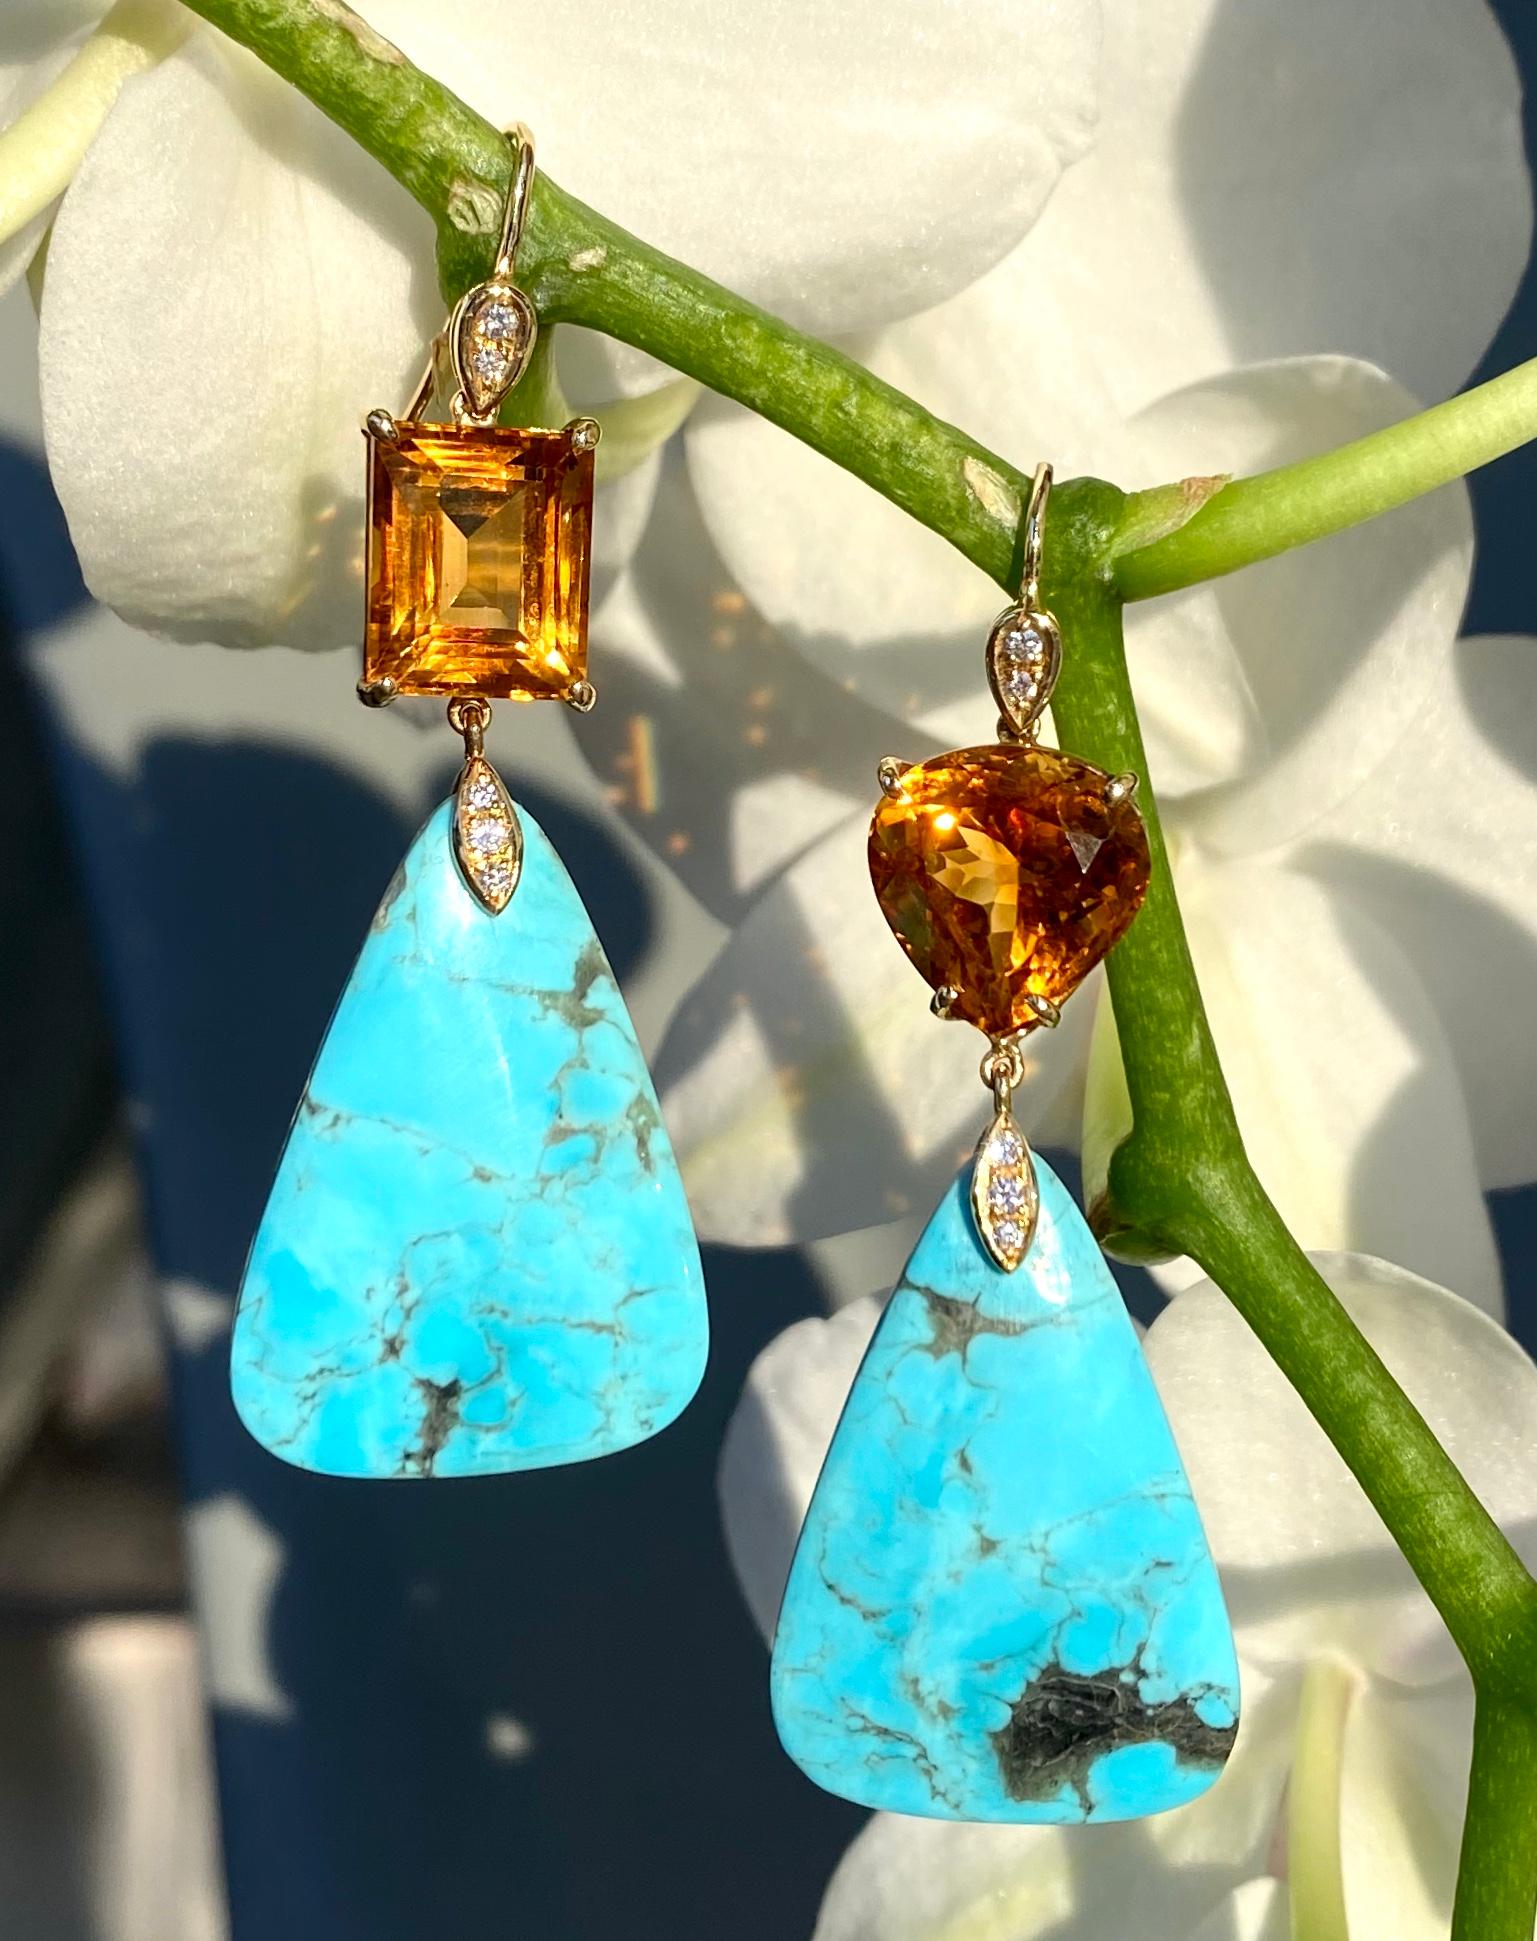 One-of-a-kind earrings of turquoise slices with faceted citrines and diamonds, handcrafted in 18 karat yellow gold. 2 1/4 inches or 57 mm in length.

A gorgeous combination of vibrant Kingman turquoise paired with richly-hued citrines and white